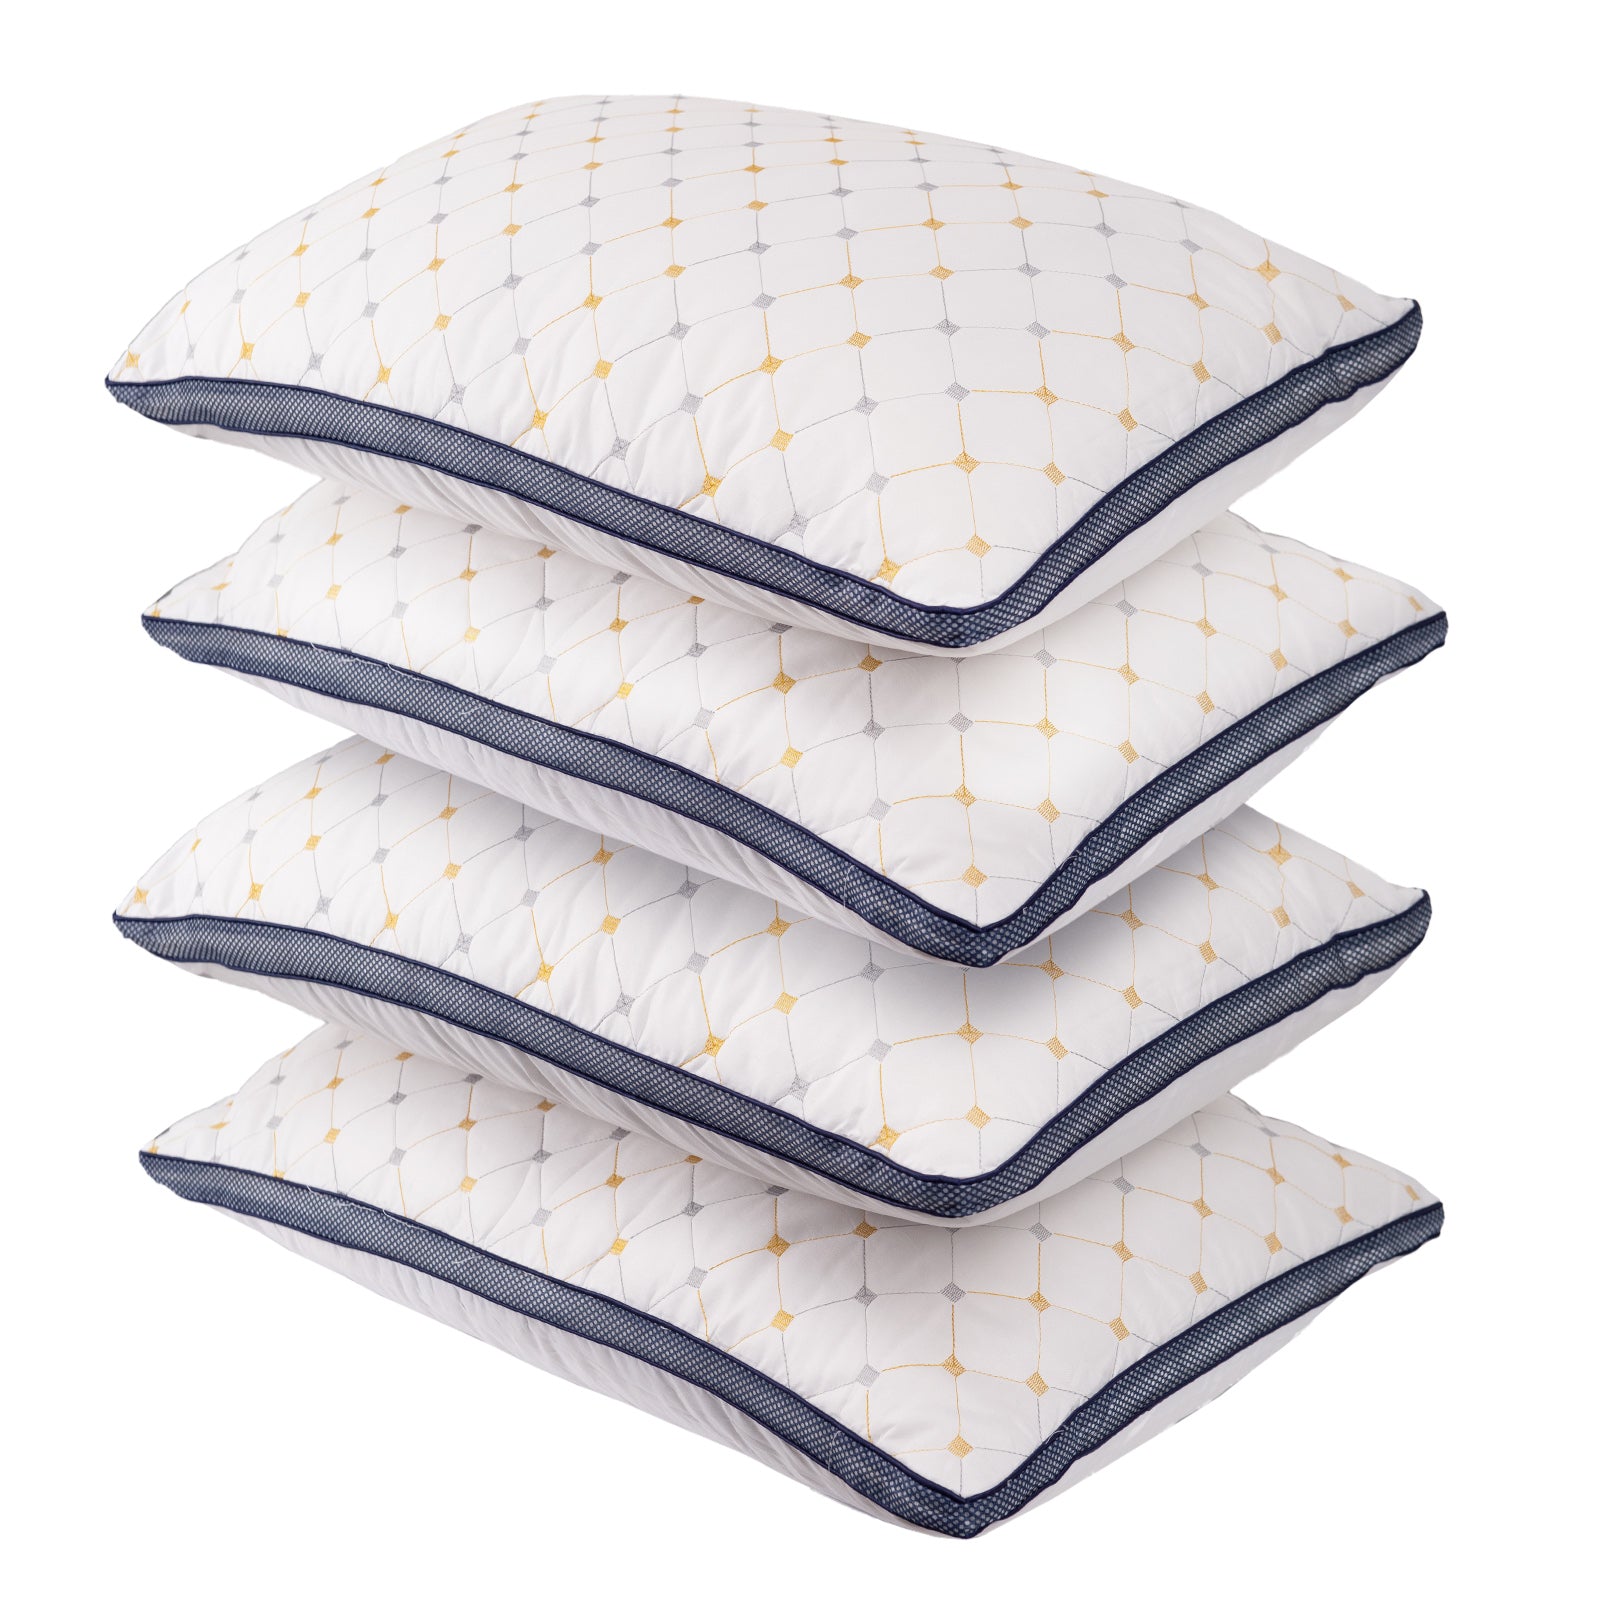 Royal Comfort Luxury Air Mesh Pillows Hotel Quality Checked Ultra Comfort-Bedding-PEROZ Accessories